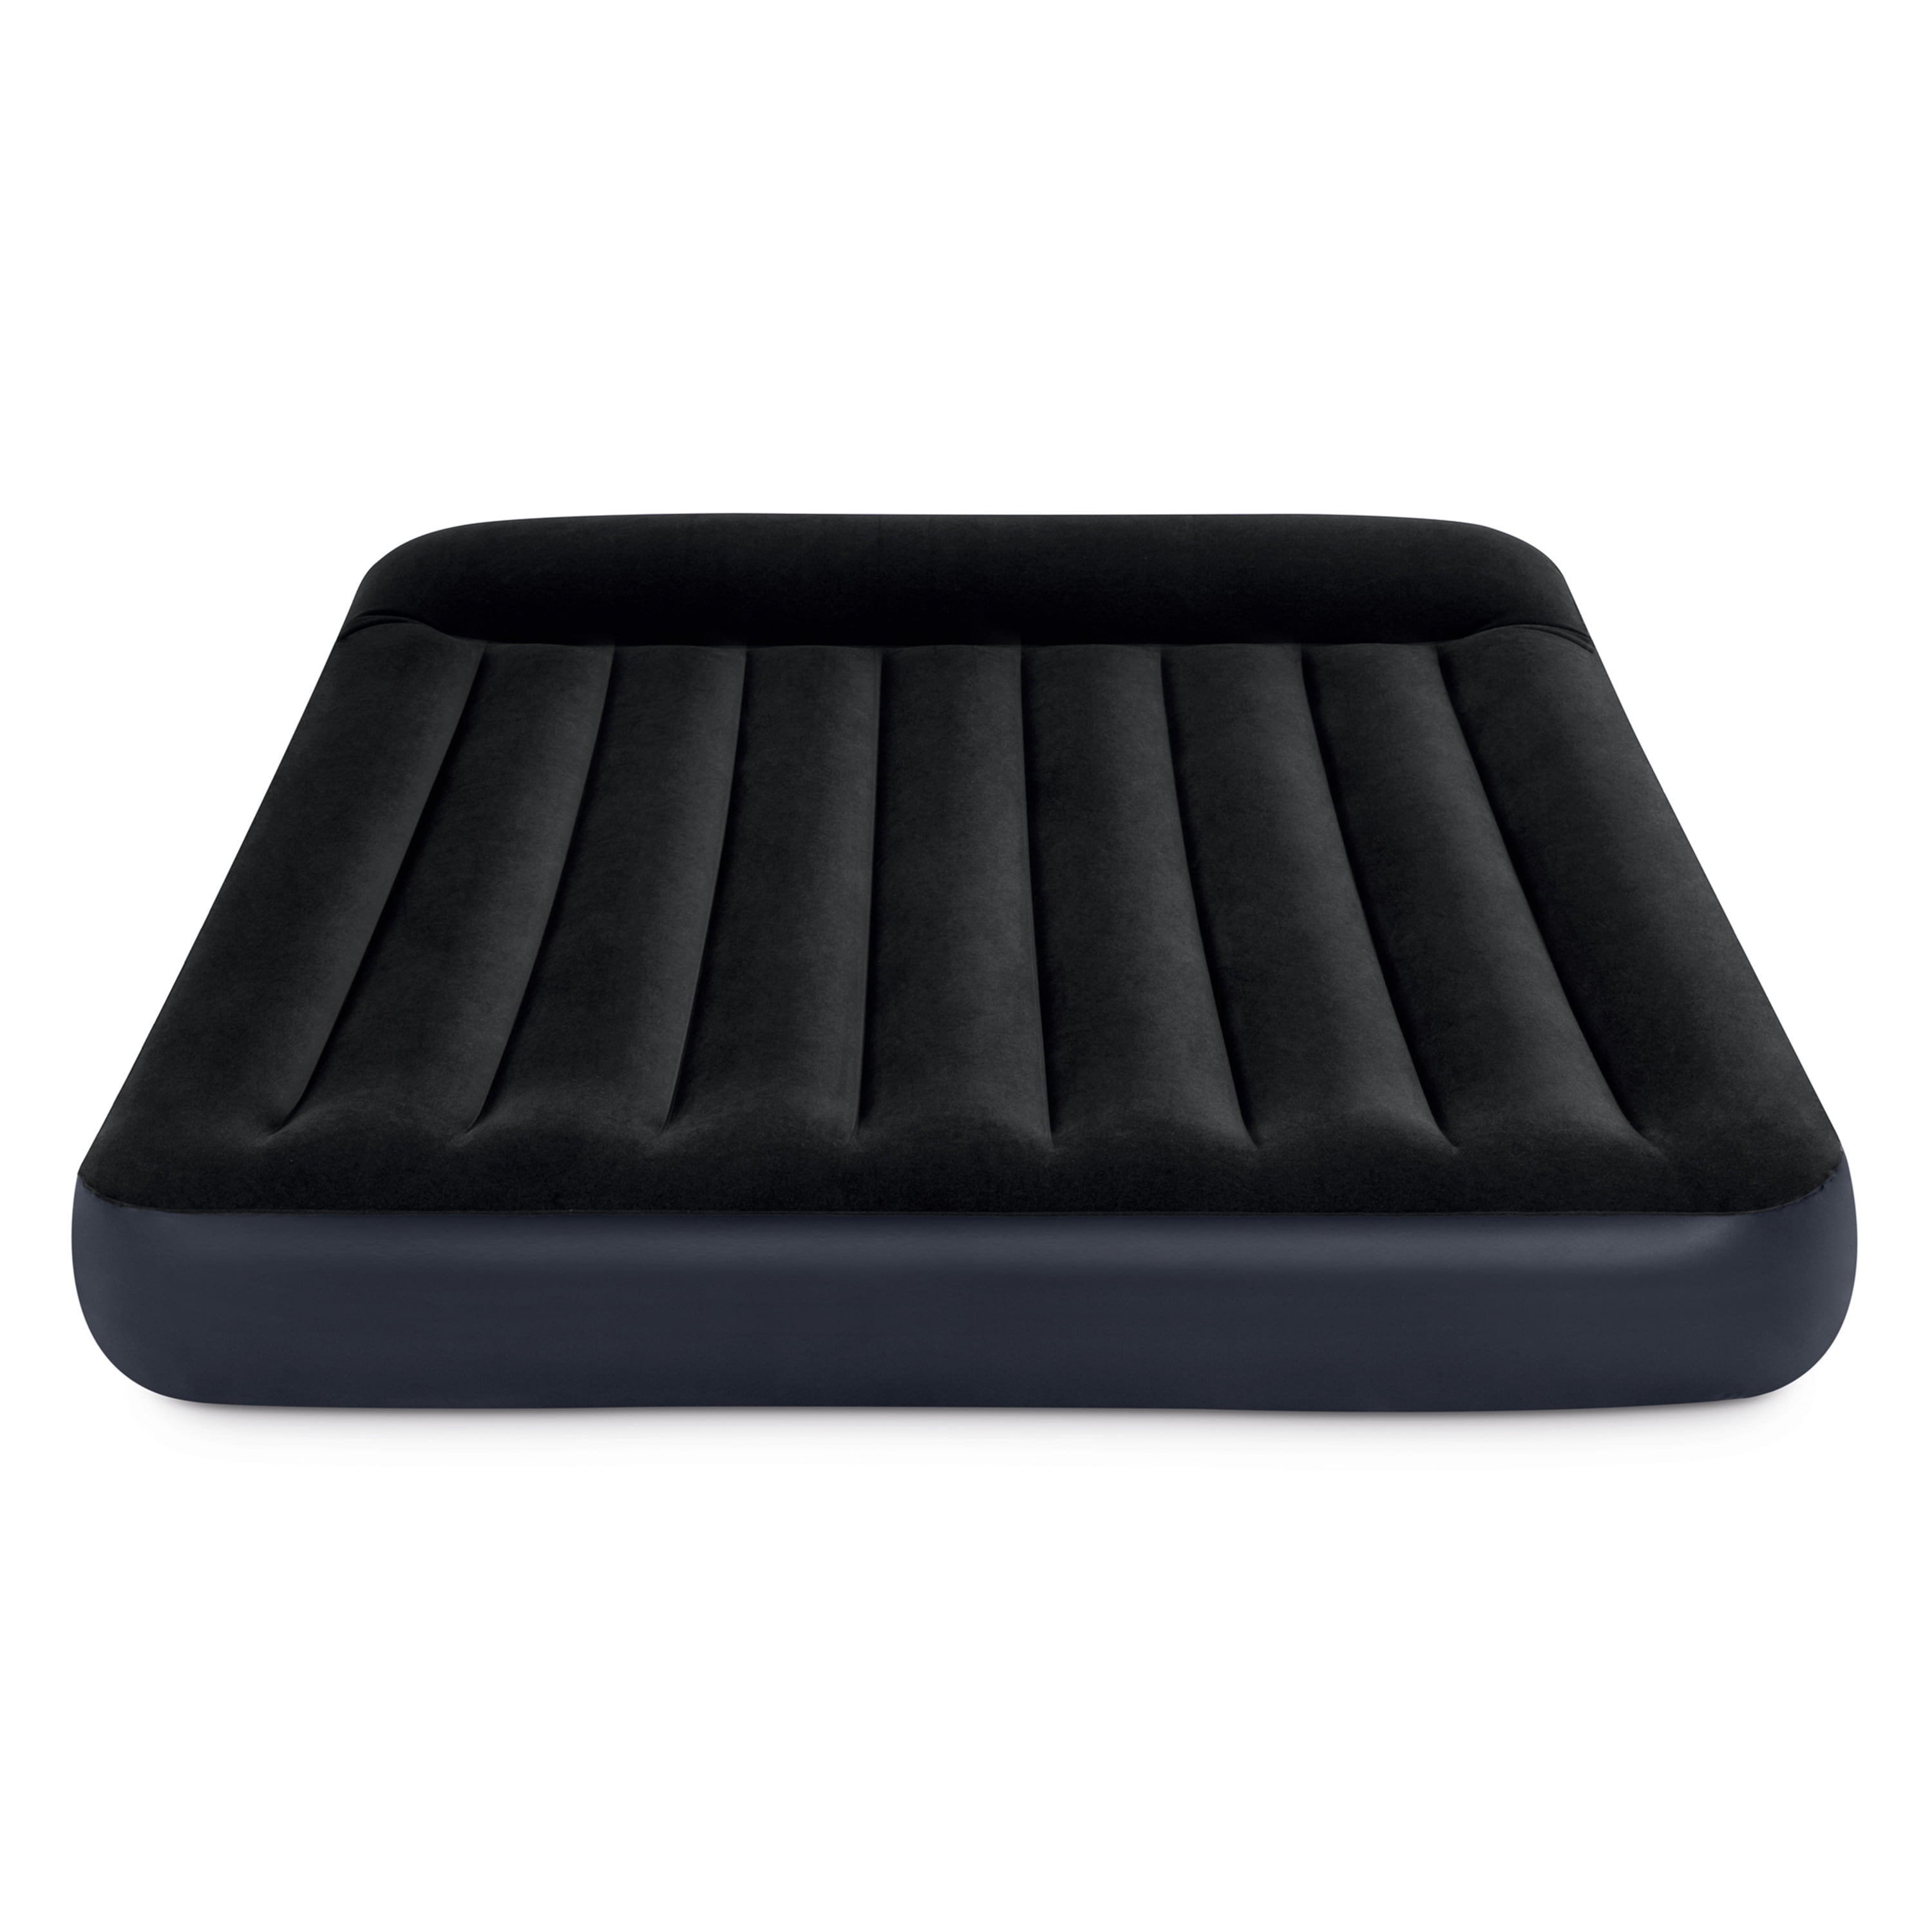 Intex Classic Inflatable Full Airbed With Built In Pillow Rest 2 Pack Pump 